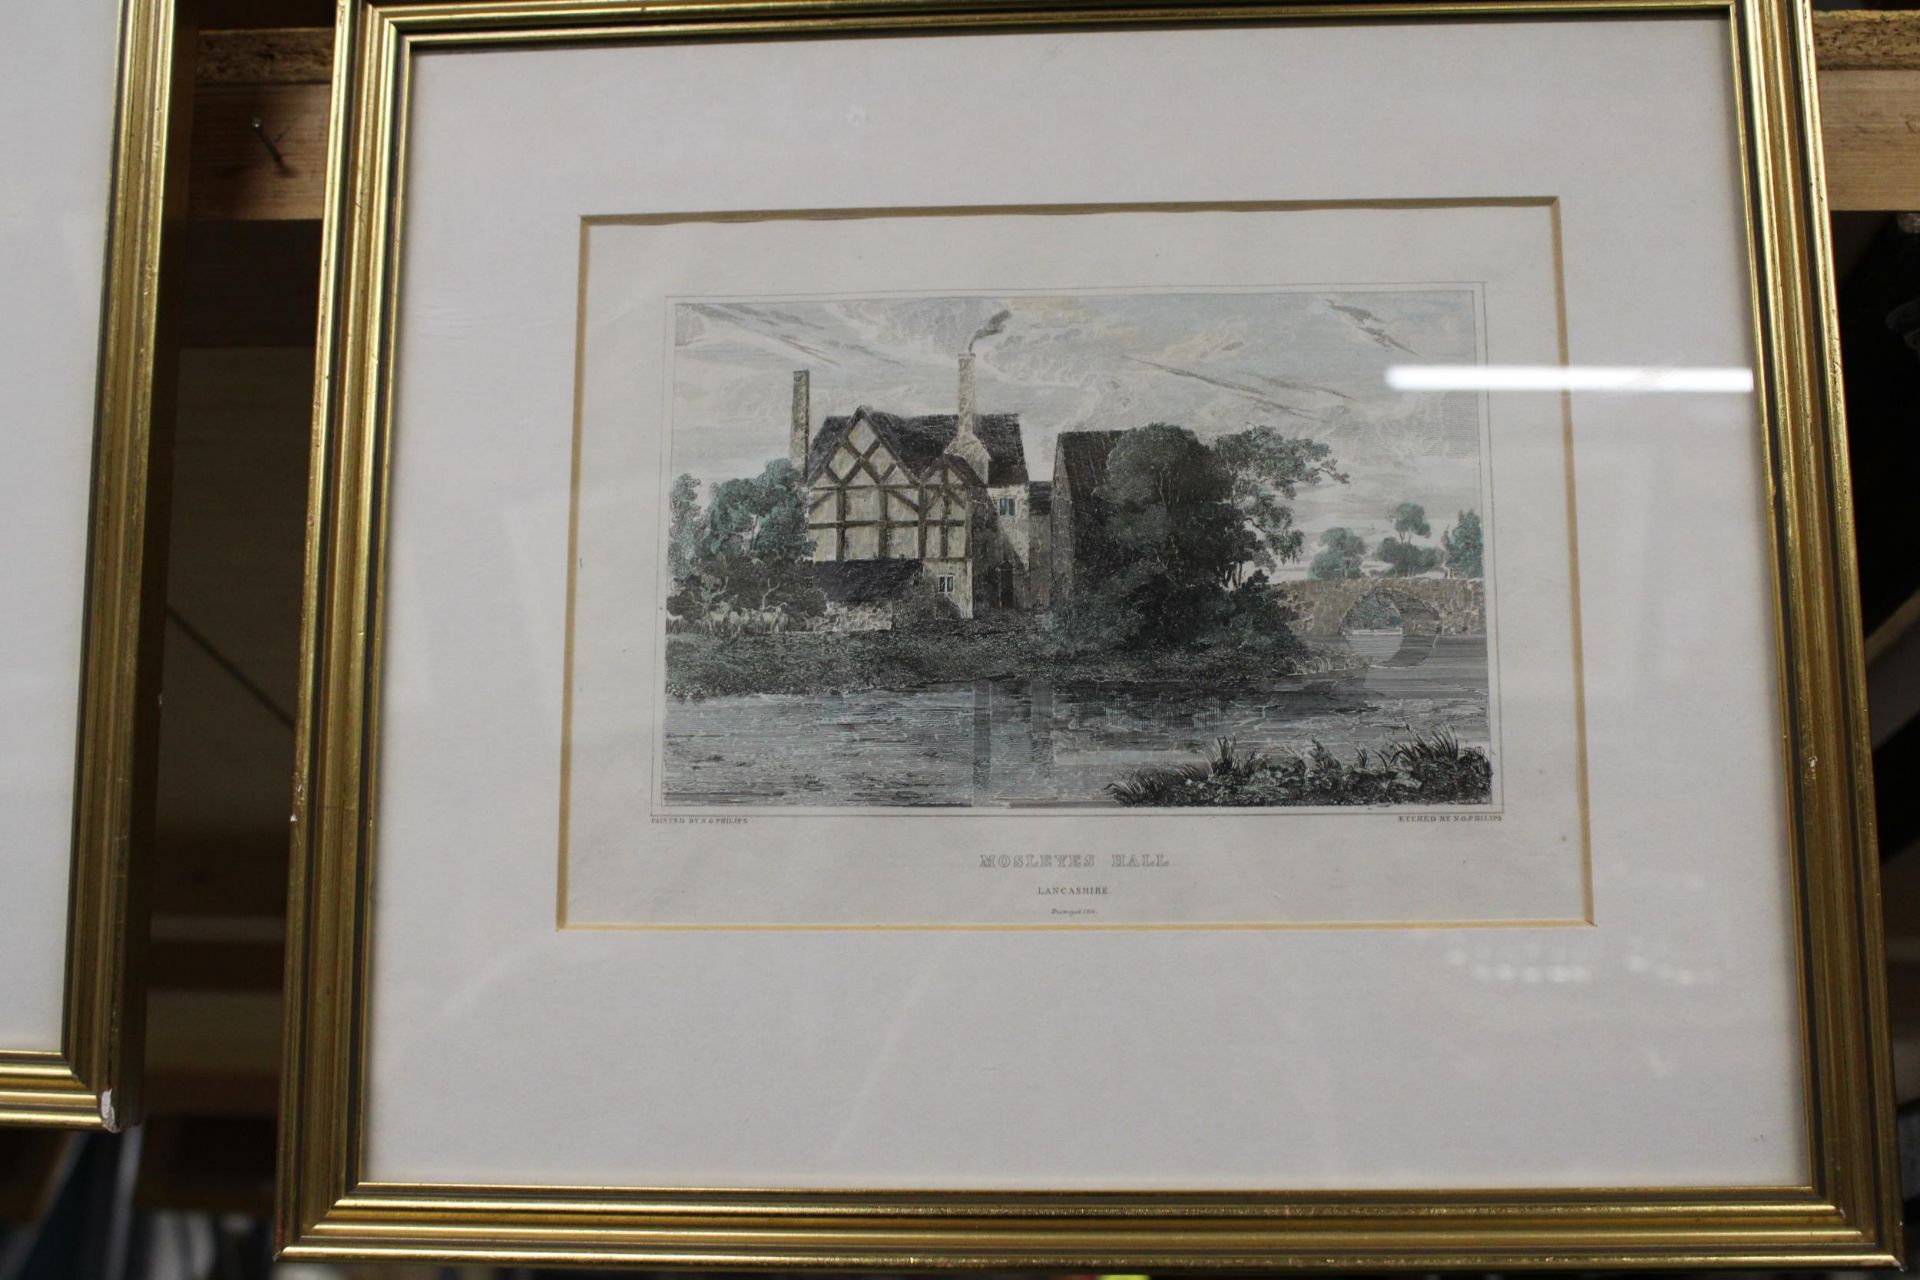 TWO VINTAGE COLOURED ENGRAVINGS, 'MOSLEYES HALL' AND 'WIDNESS HALL', FRAMED - Image 3 of 5